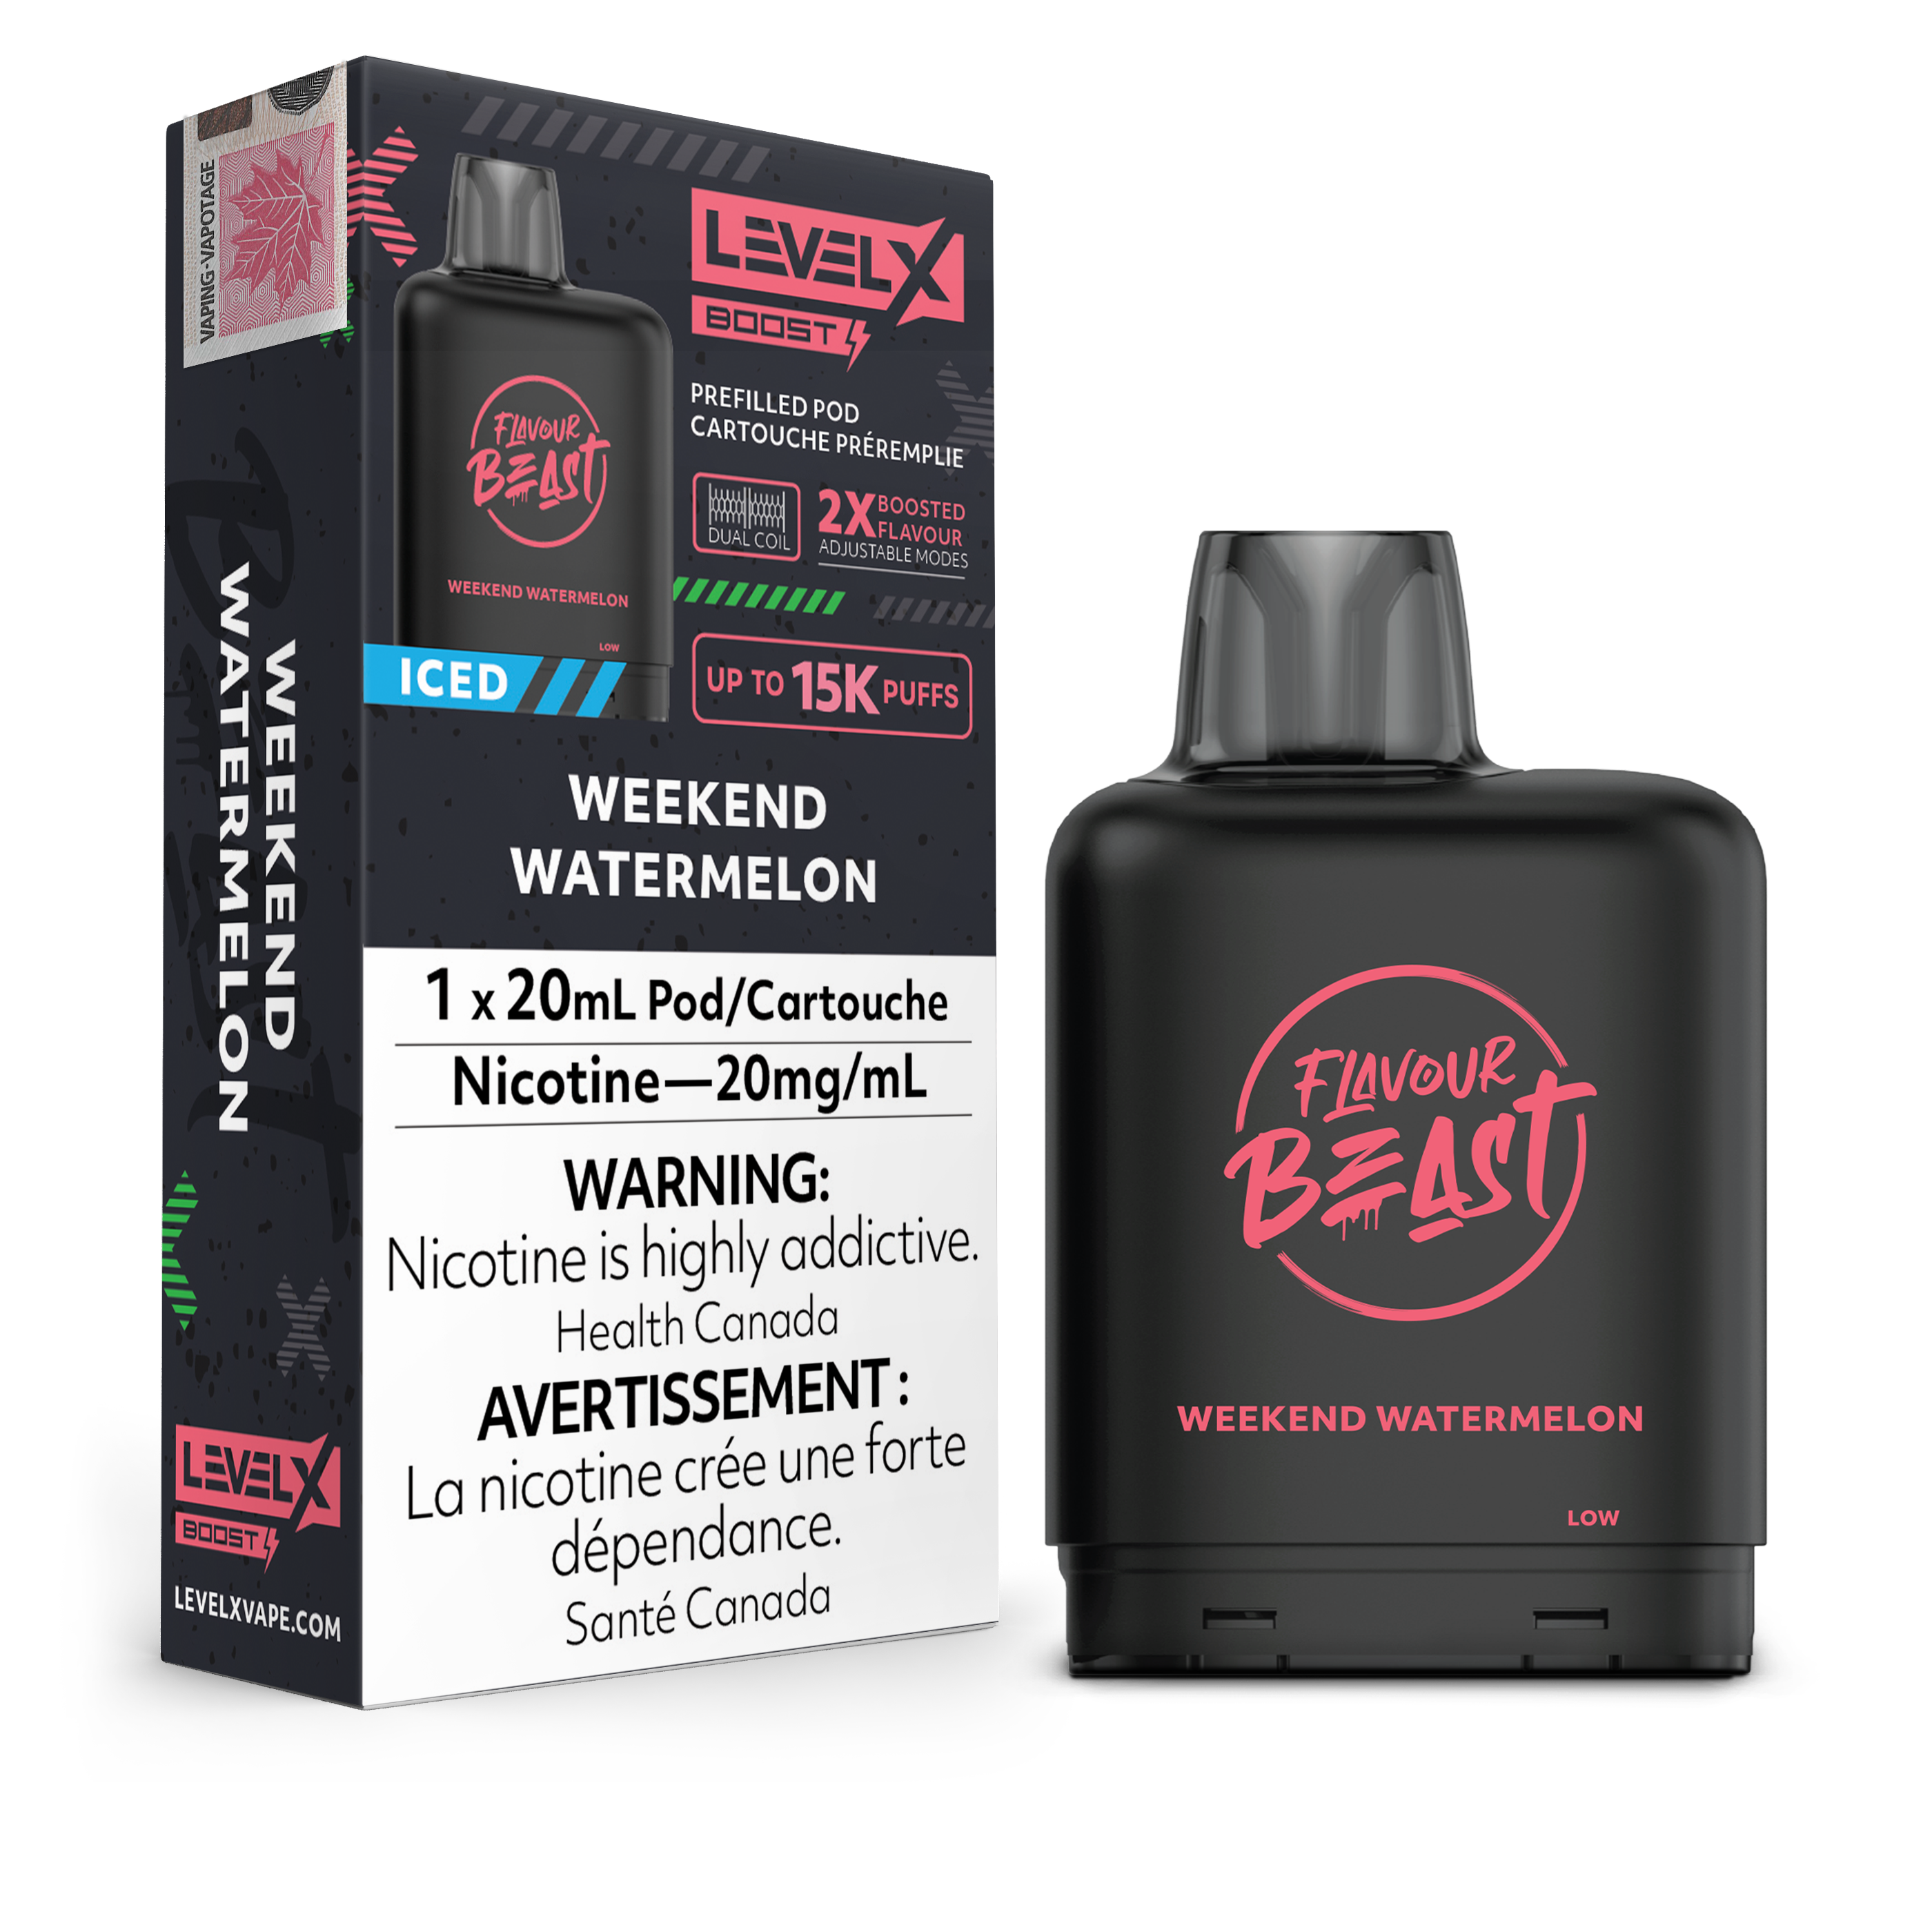 LEVEL X BOOST FLAVOUR BEAST Watermelon Ice 20MG